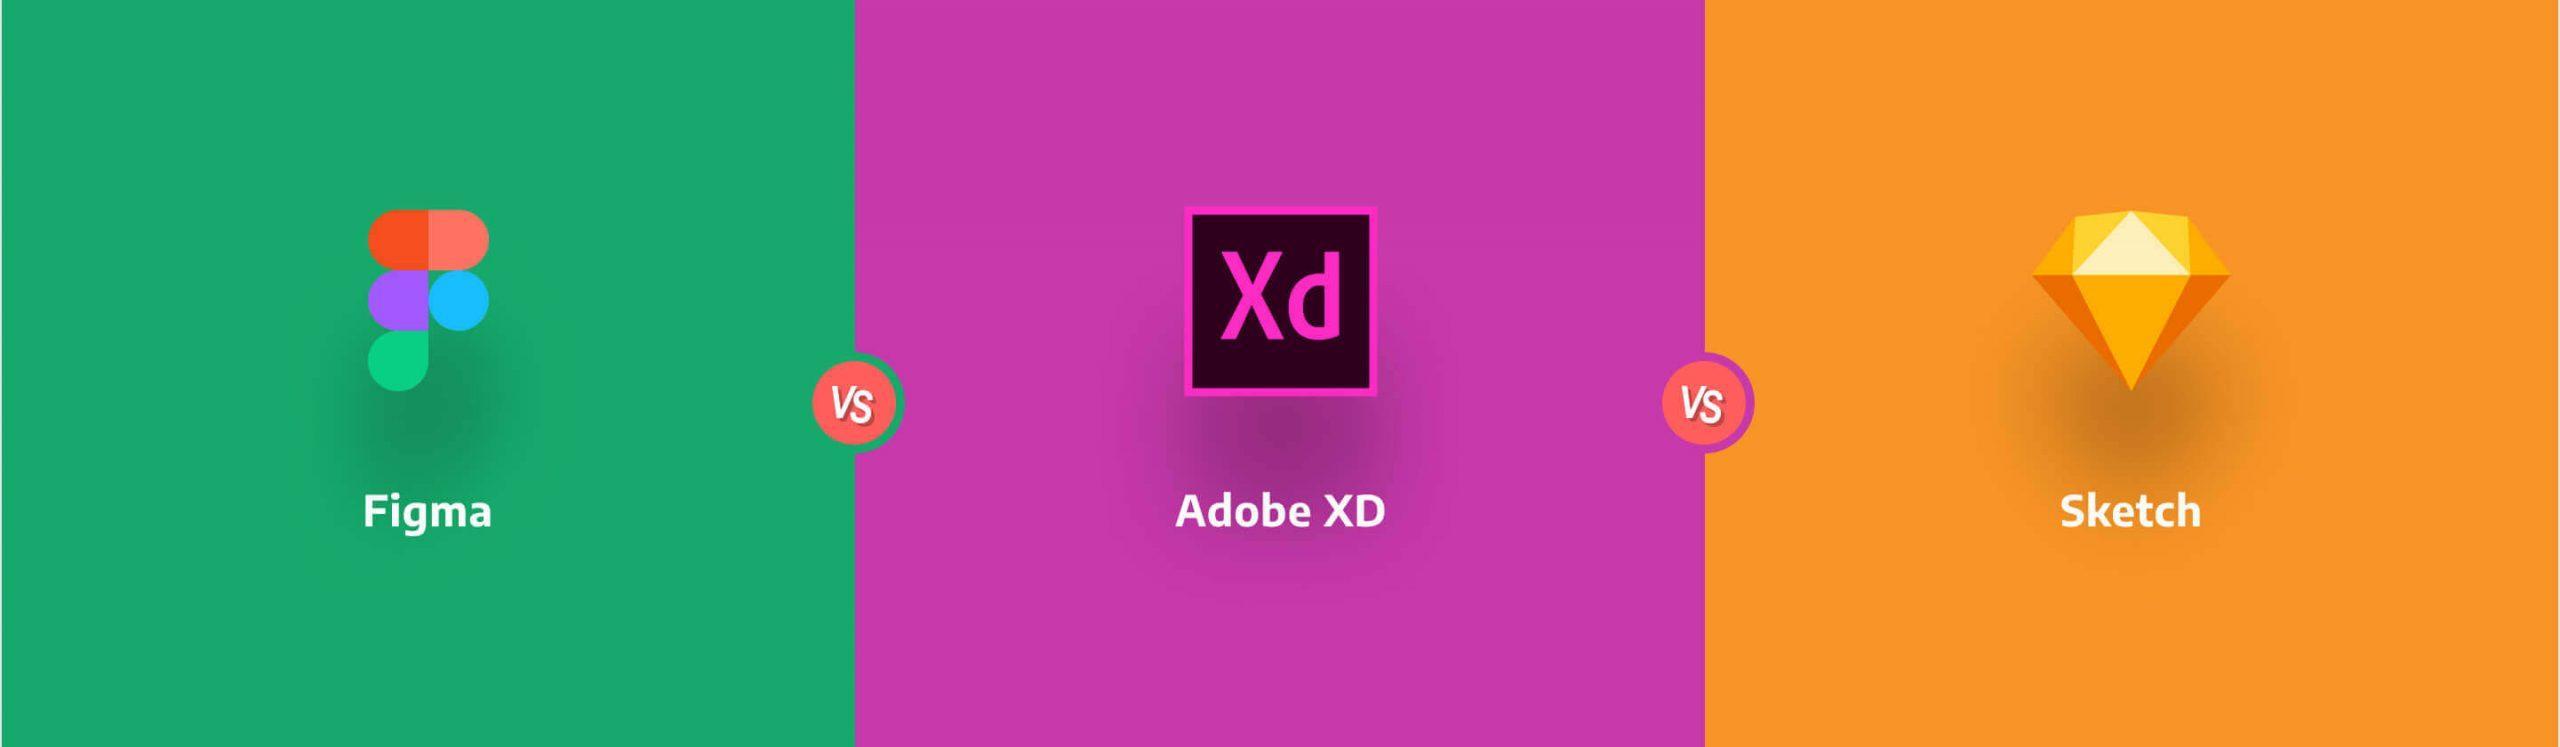 Differences between Figma vs Adobe XD vs Sketch  by CodedThemes  Medium